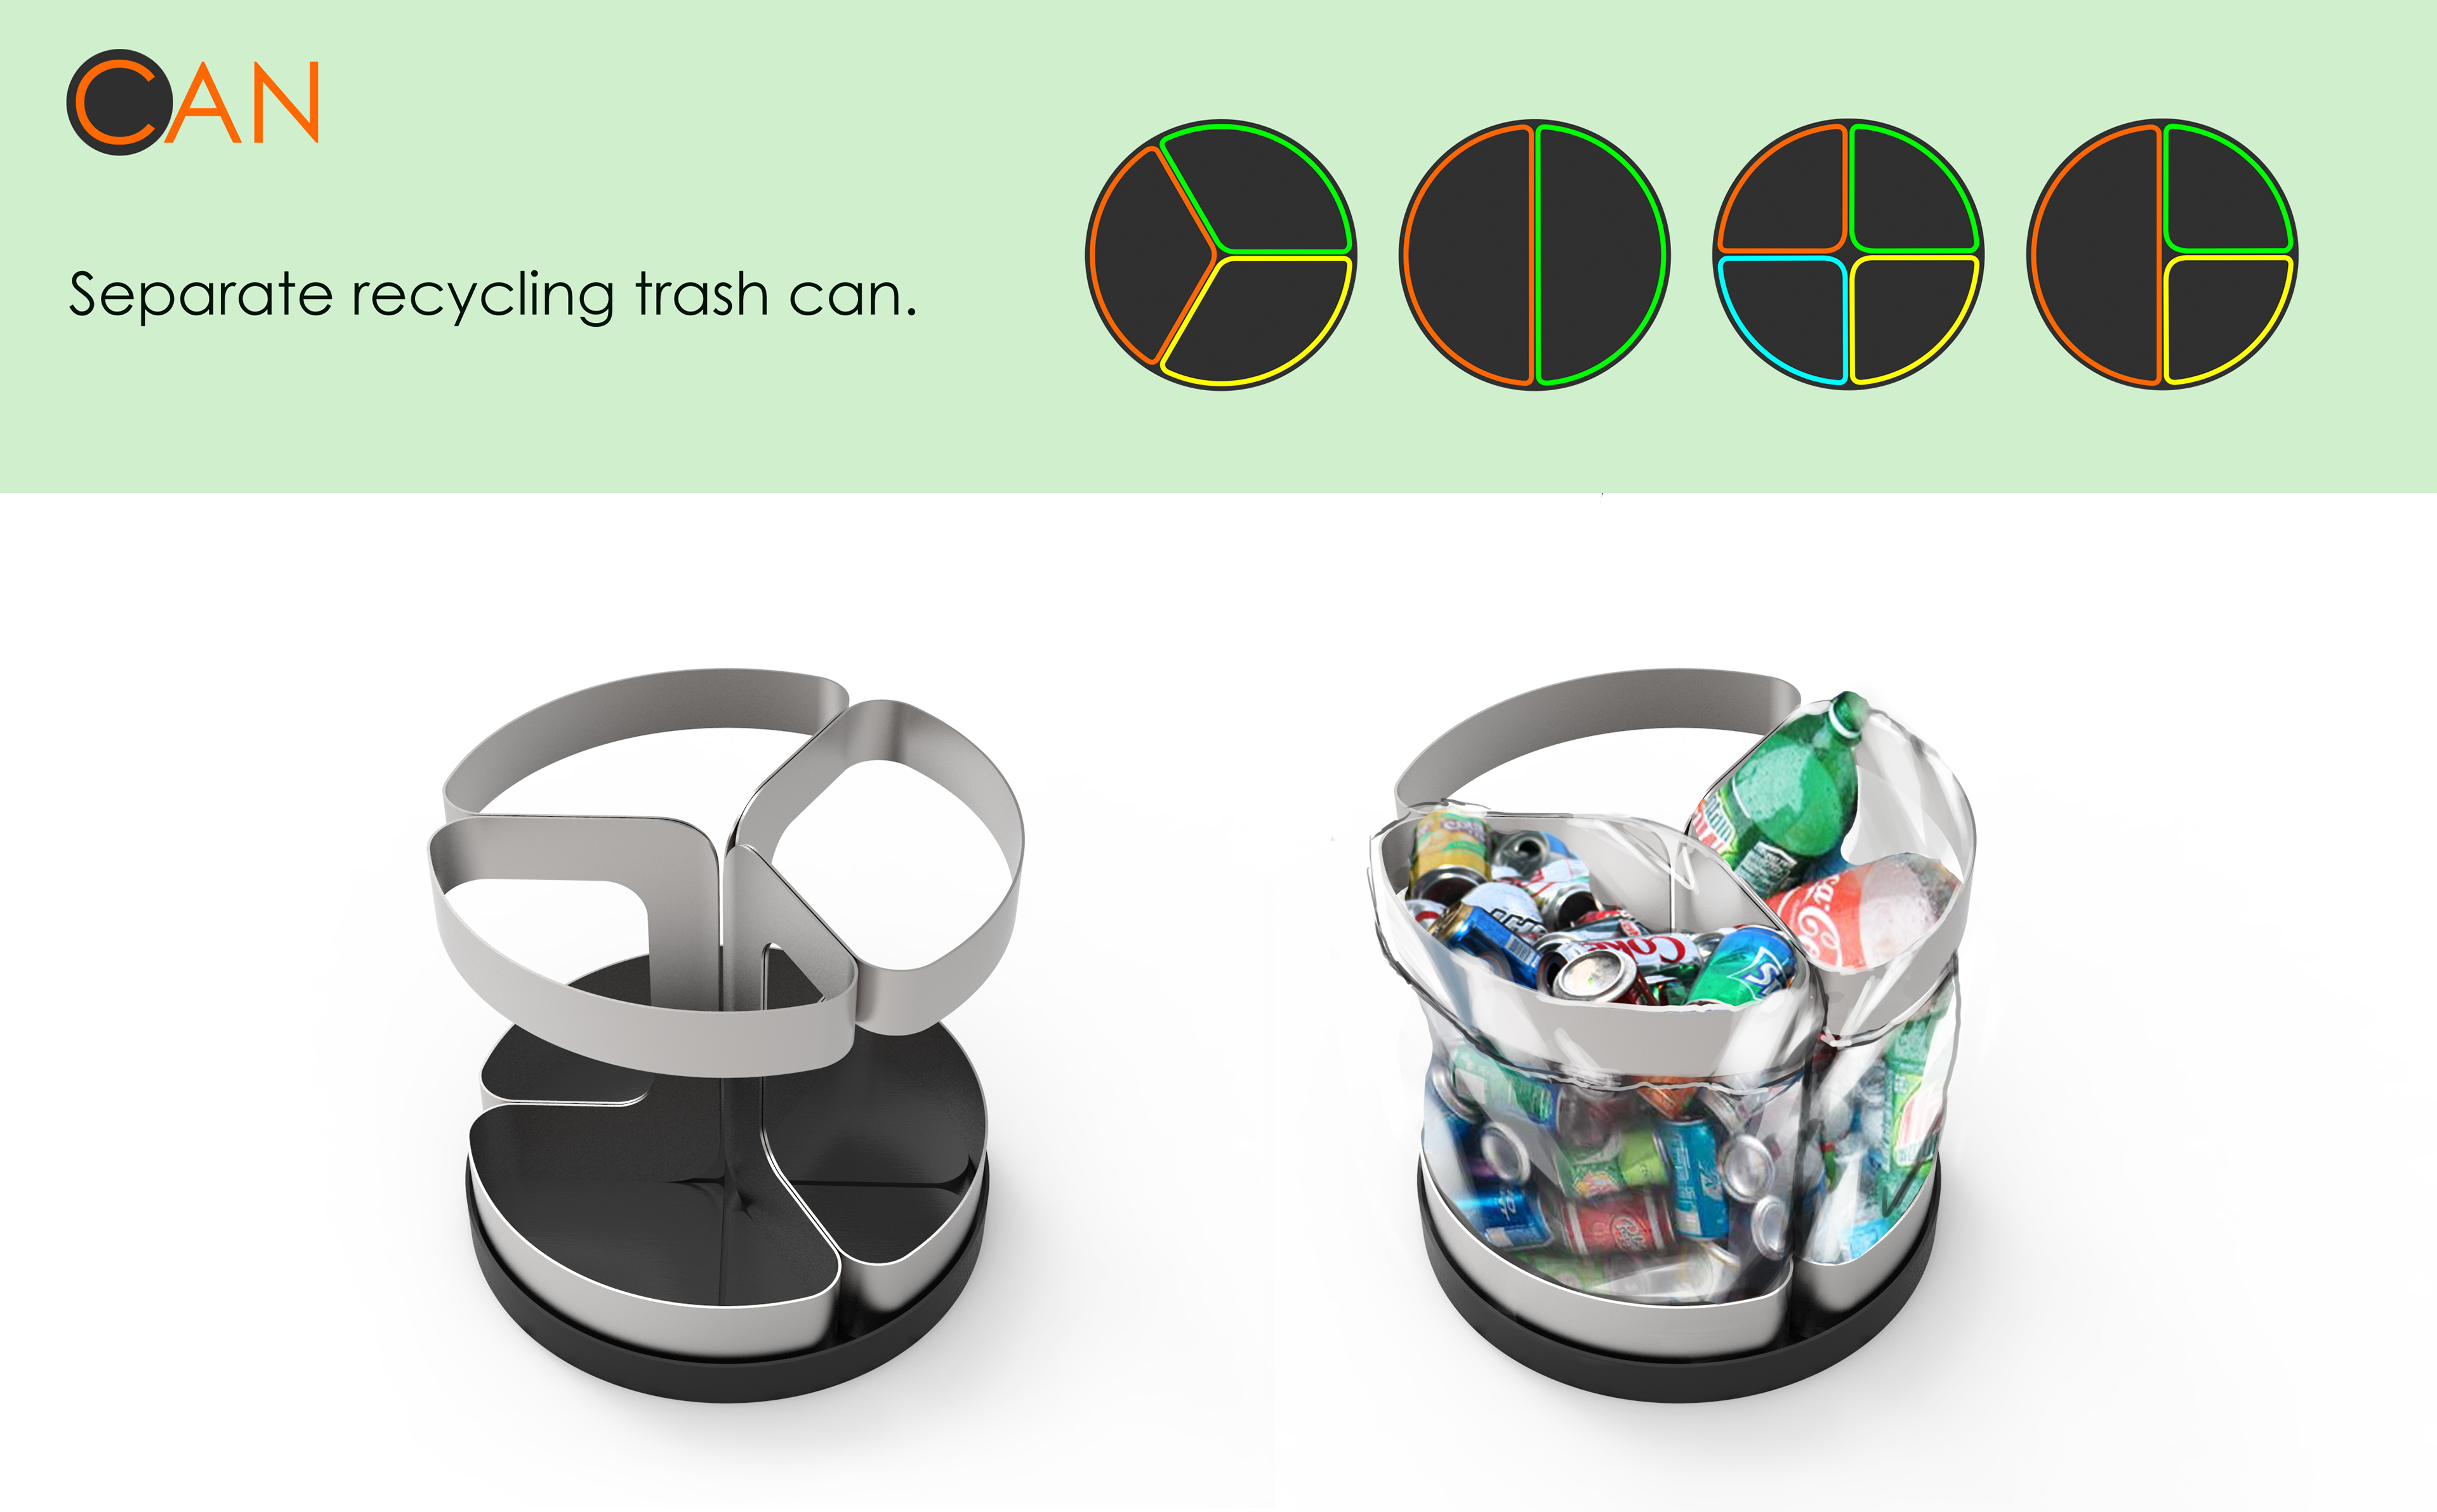 Recycle Trash. Separate Trash cans. Mr. Trash Wheel. Scheme of making a Smart Trash can AUTOCAT. Product easy